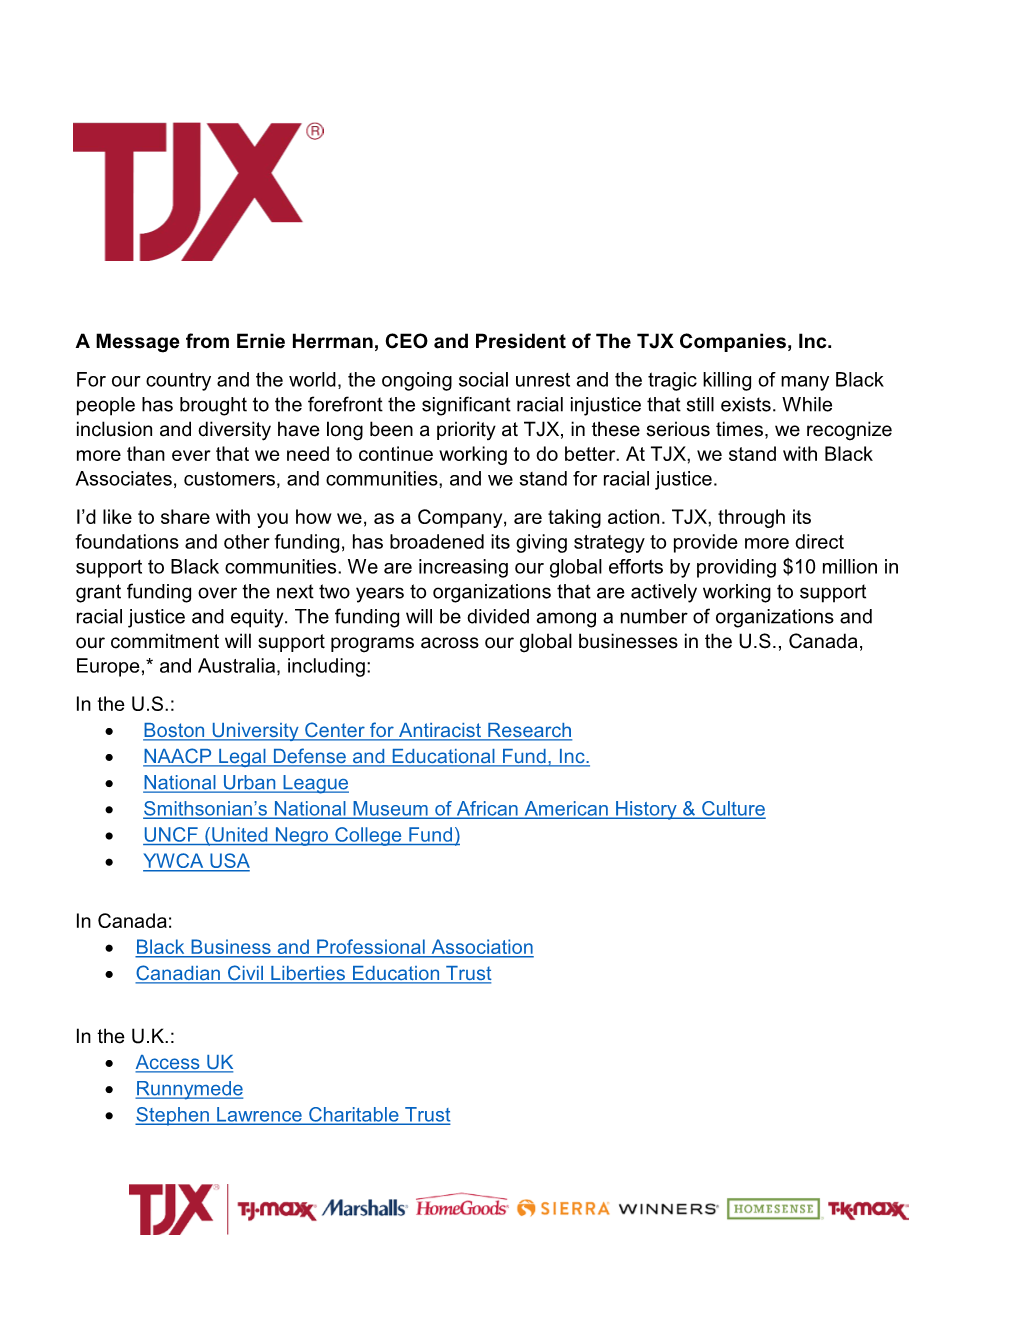 A Message from Ernie Herrman, CEO and President of the TJX Companies, Inc